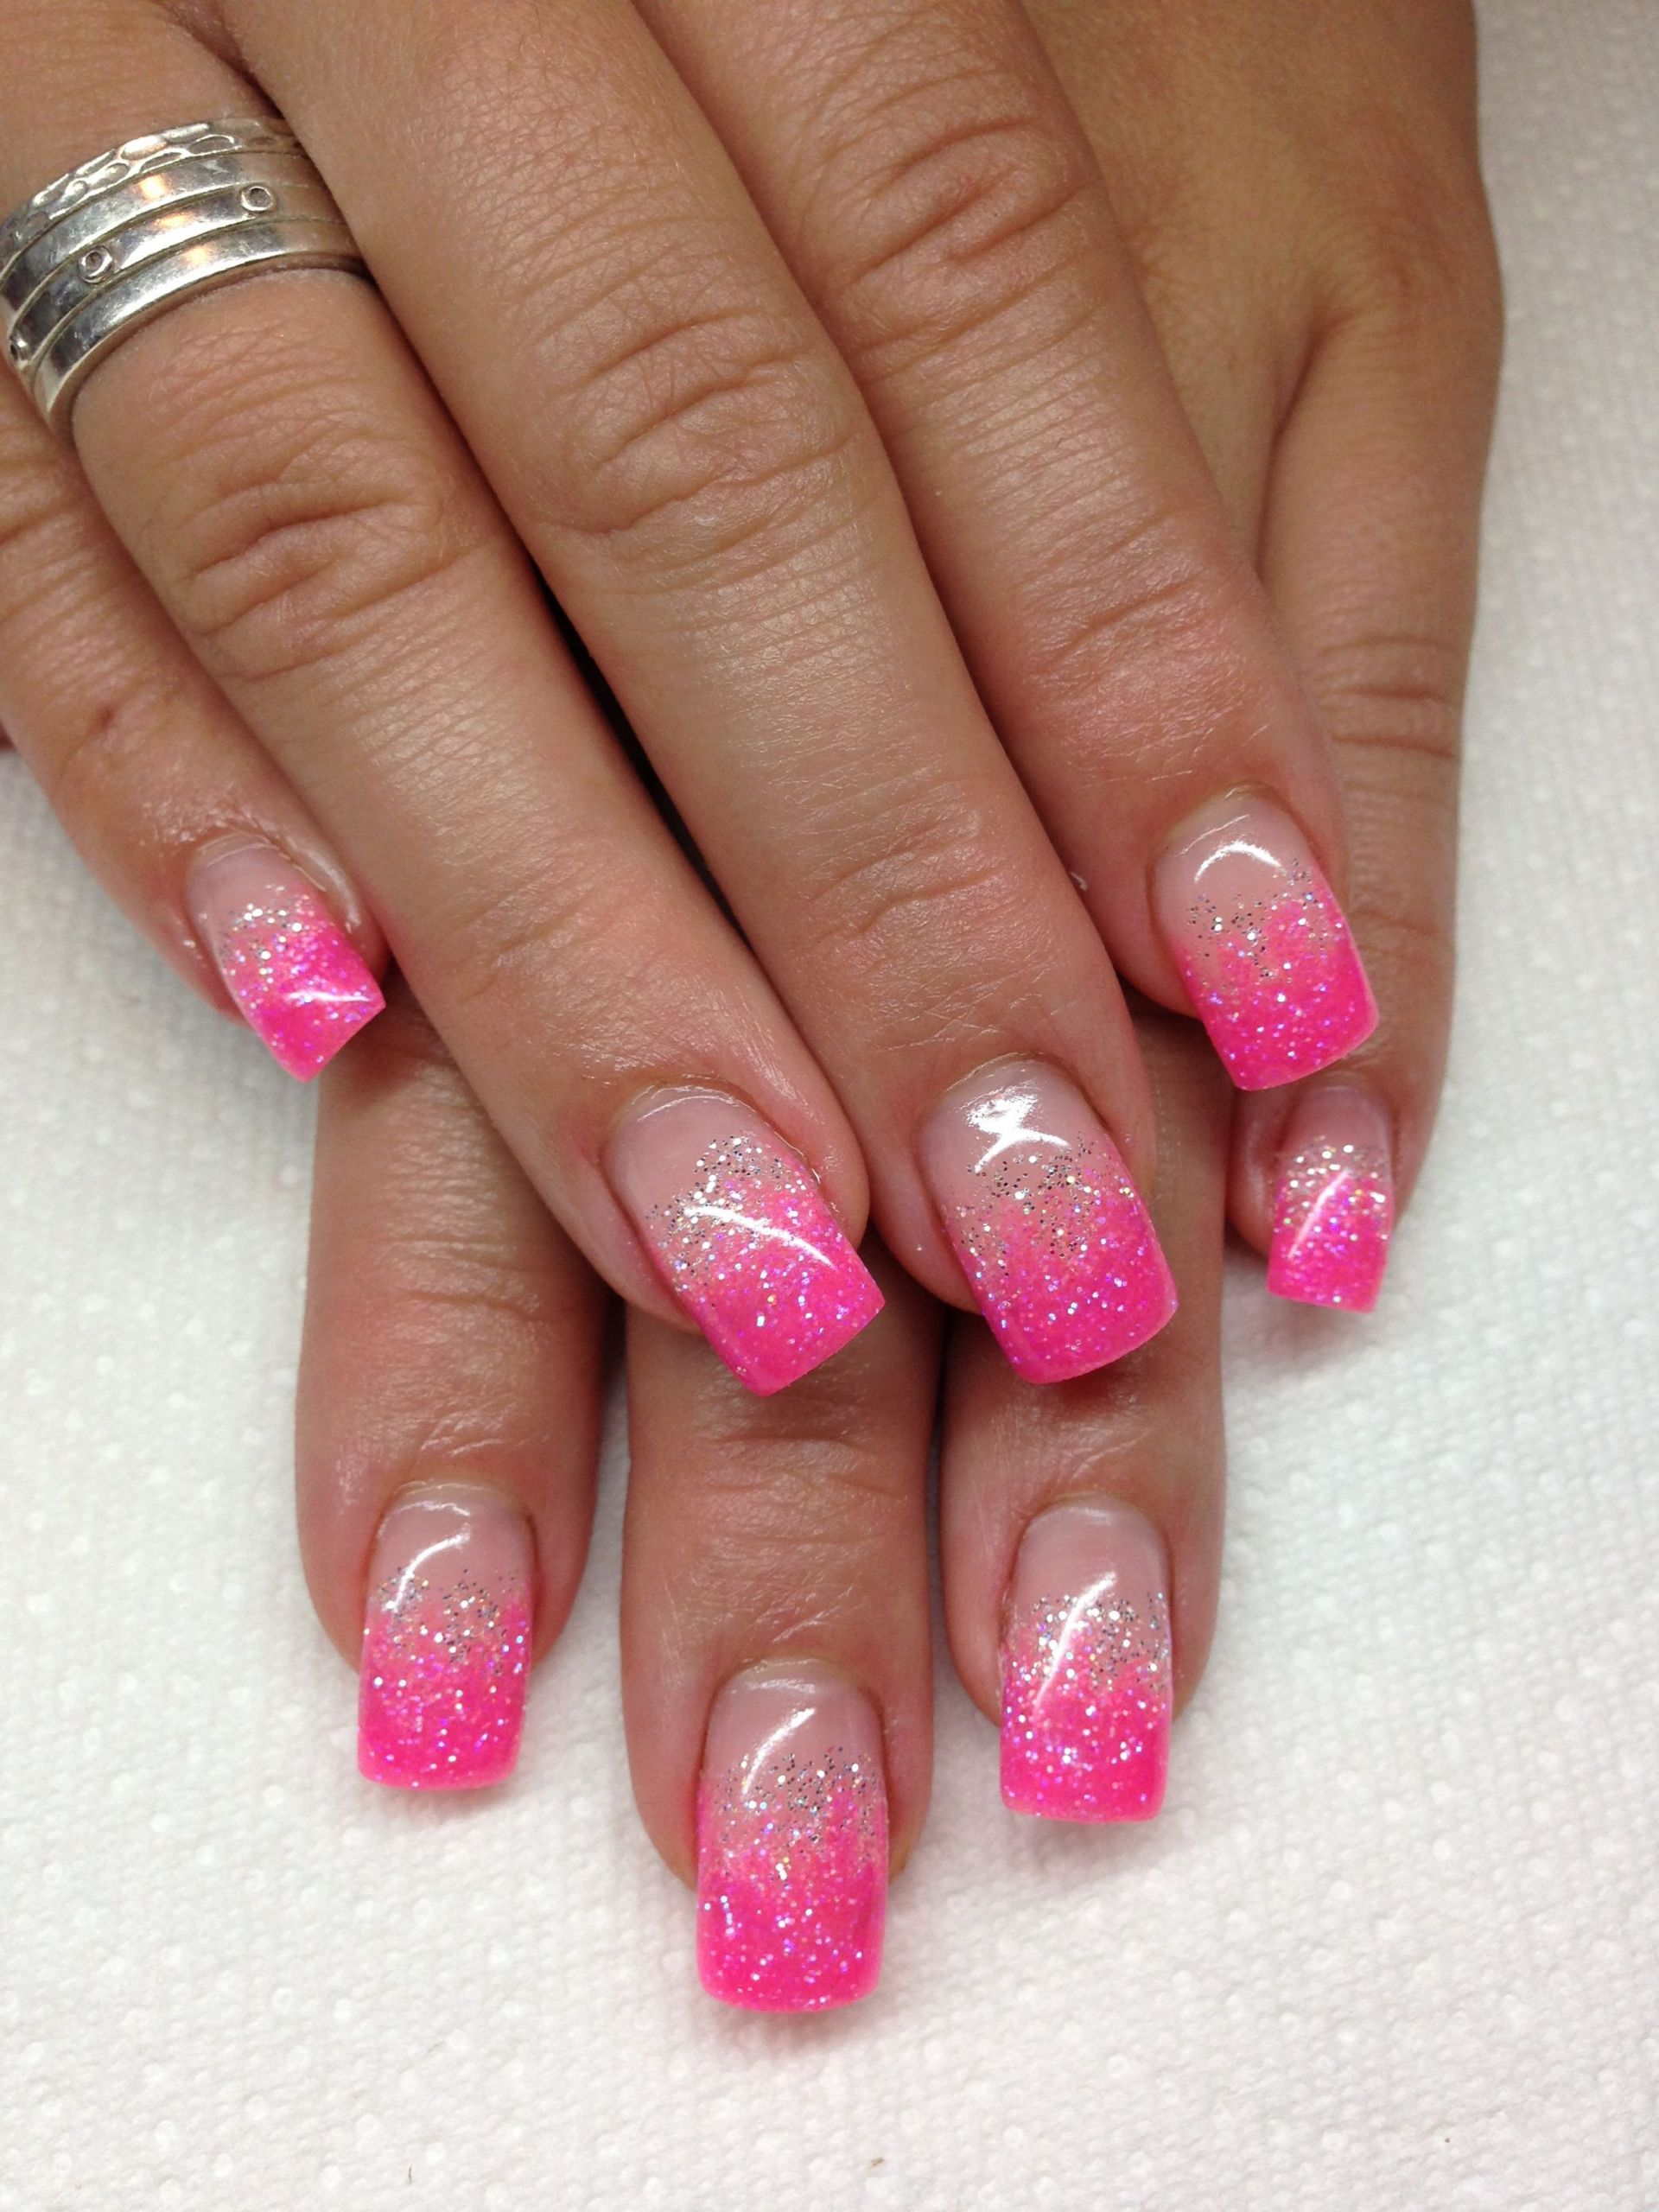 Pink Nails With Glitter Tips
 I love the pink and glitter tips